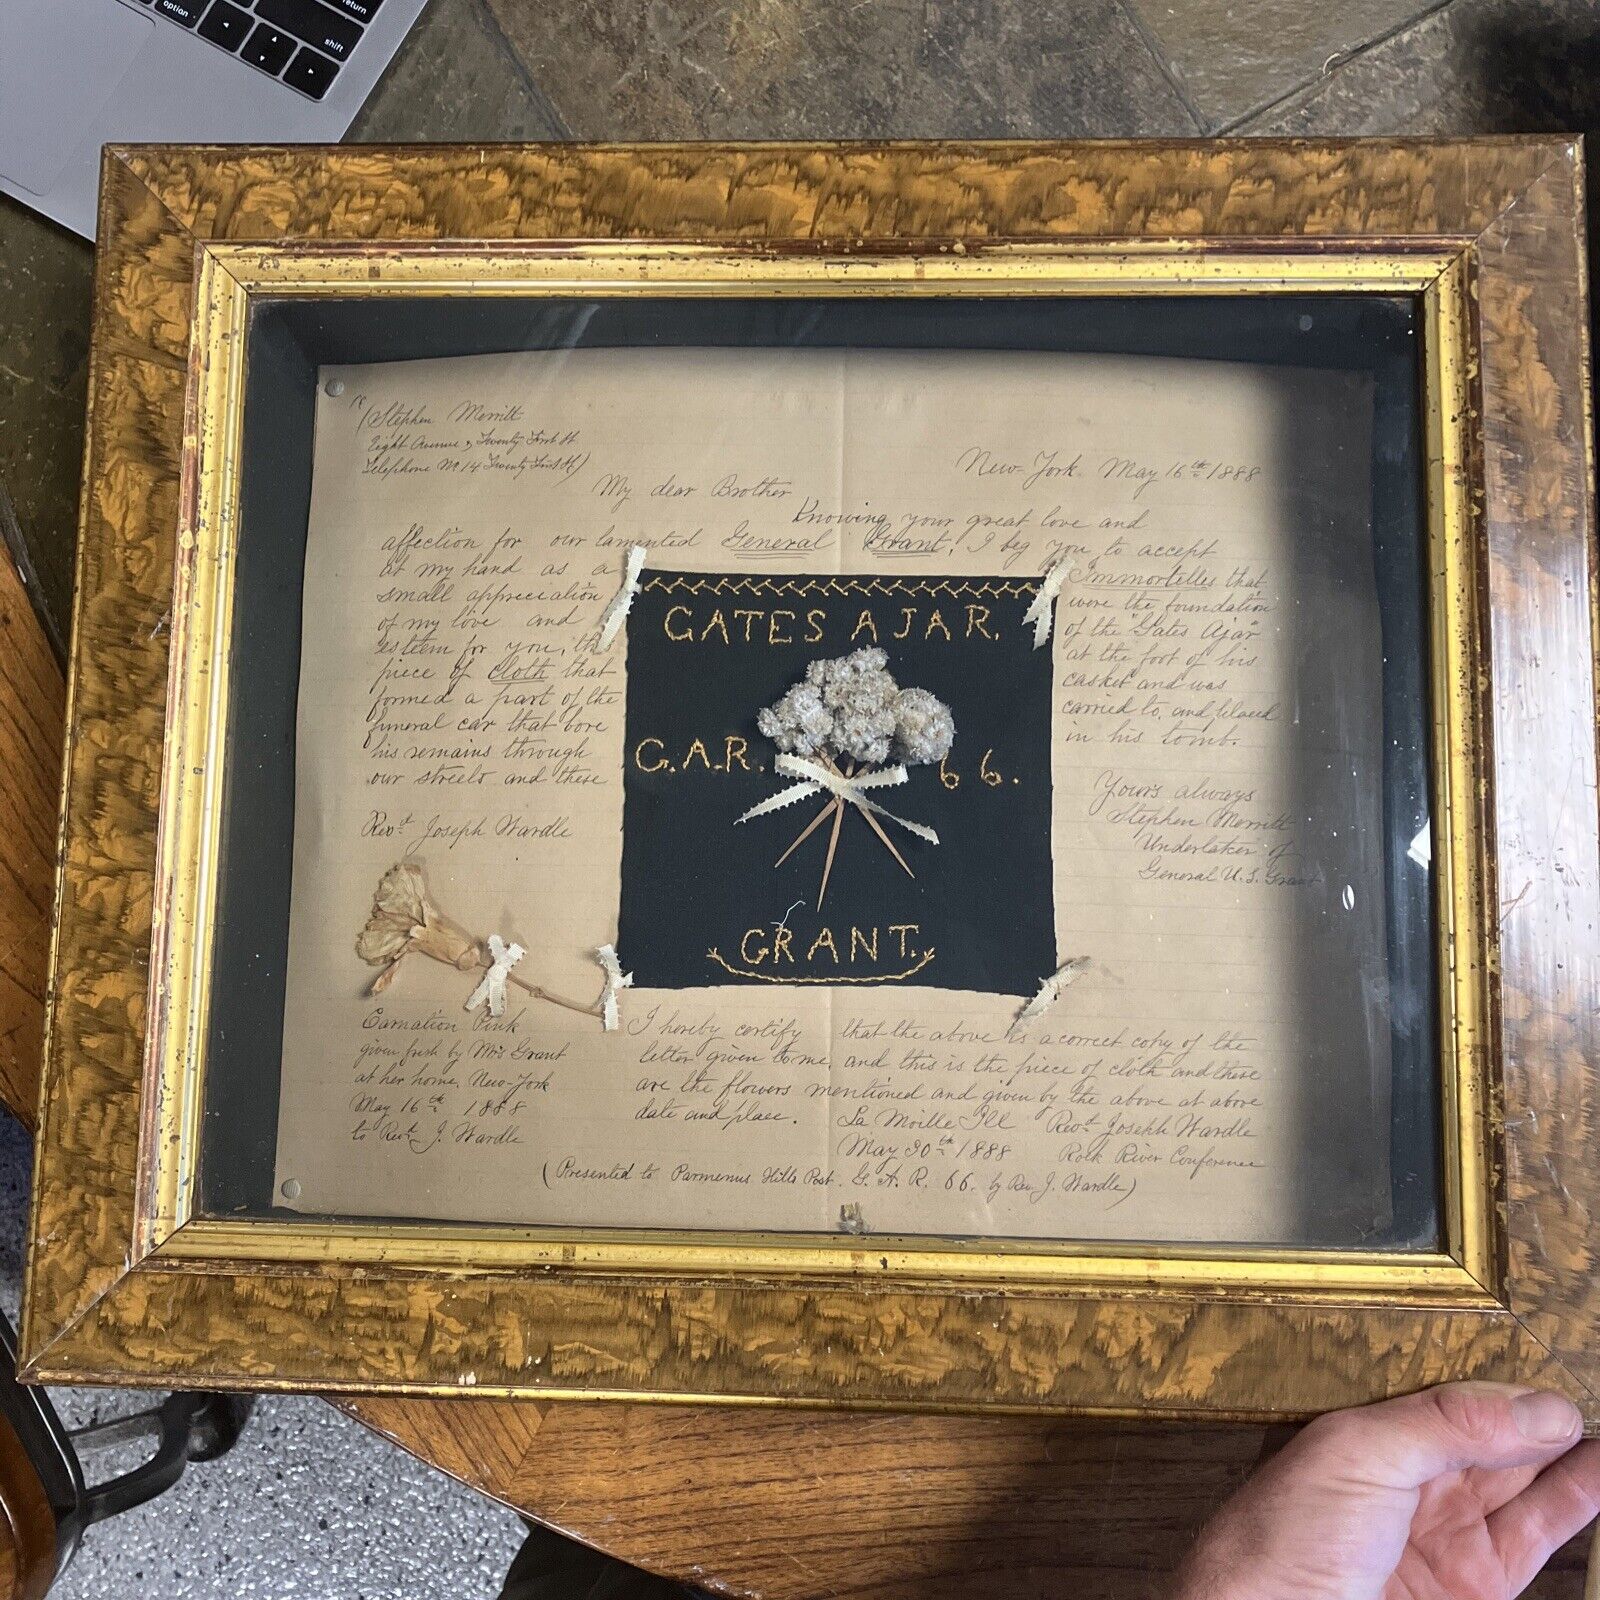 Ulysses S Grant President Piece Of Funeral Cloth & Flower From His Garden W Lett